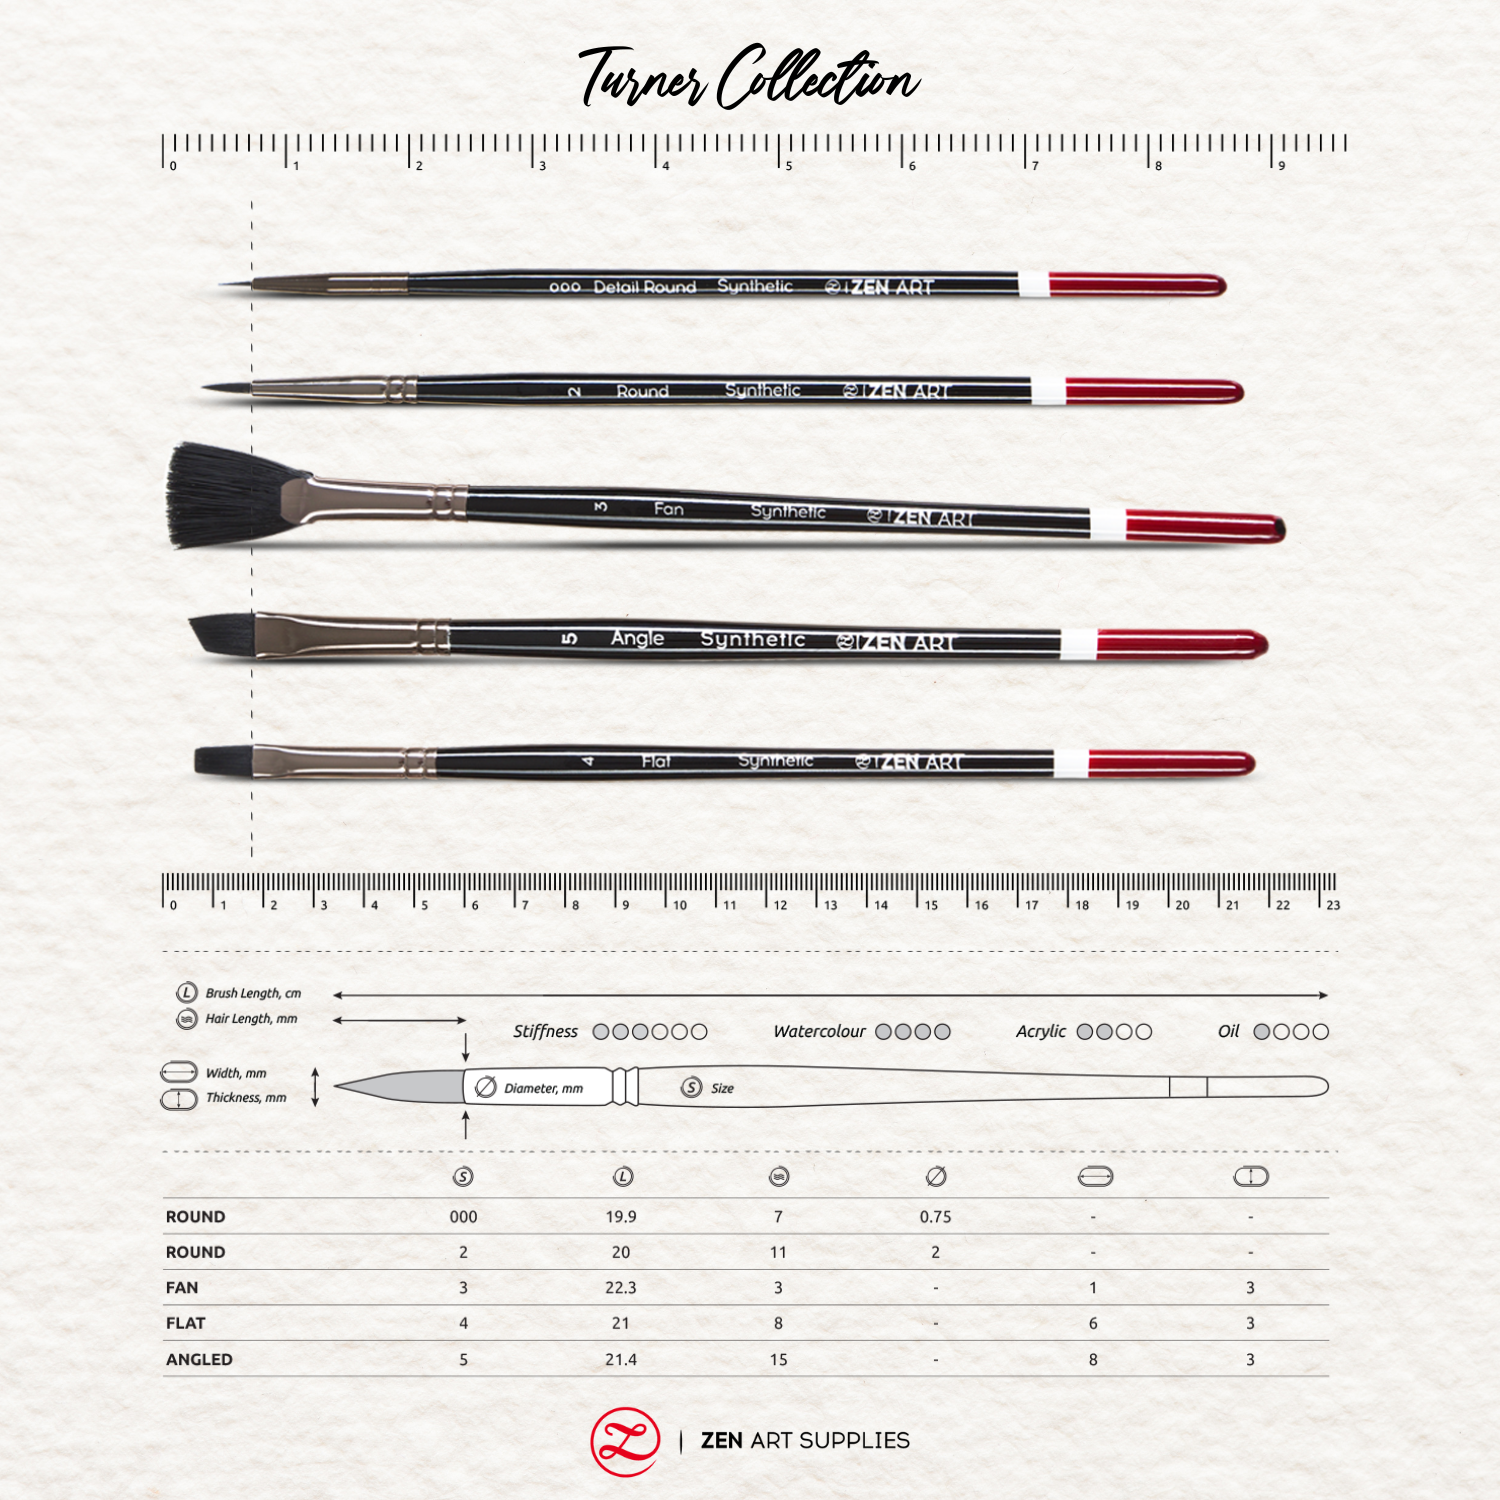 What Are the Different Paint Brush Sizes? – ZenARTSupplies